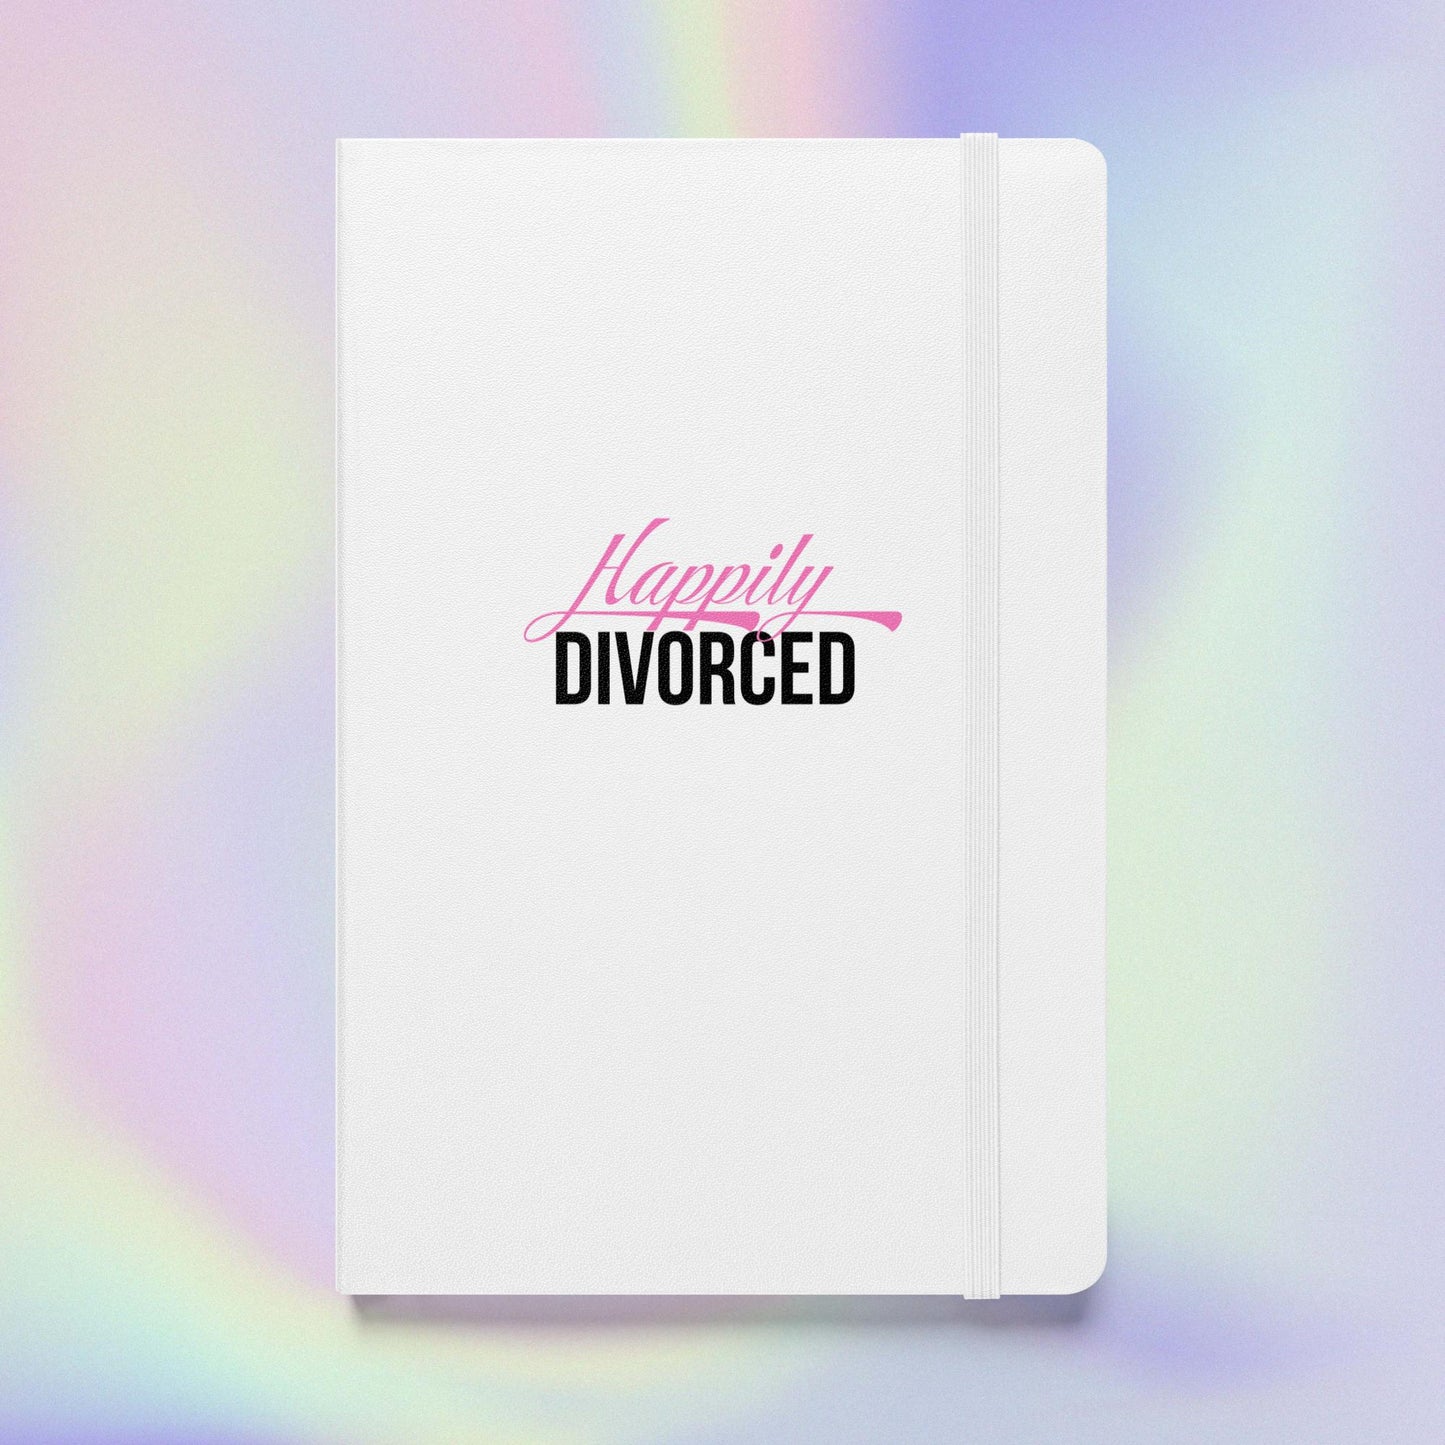 Happily Divorced: Hardcover bound notebook